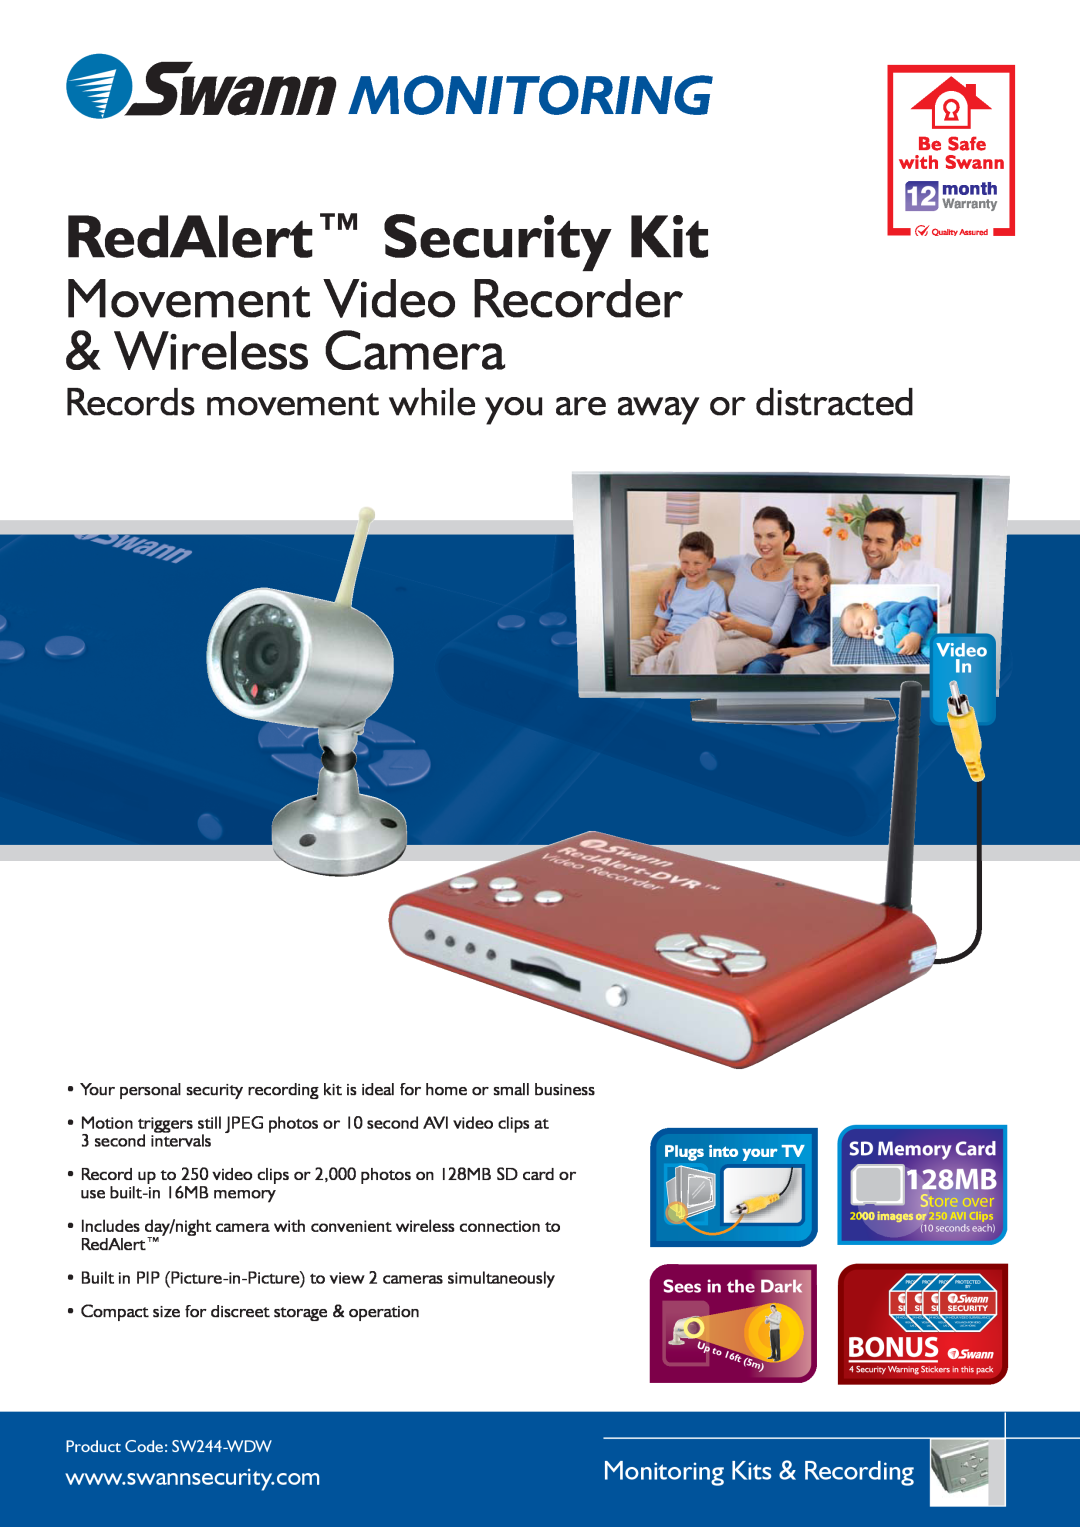 Swann SW244-WDW warranty RedAlert Security Kit, Monitoring, Movement Video Recorder & Wireless Camera, Video In, 128MB 